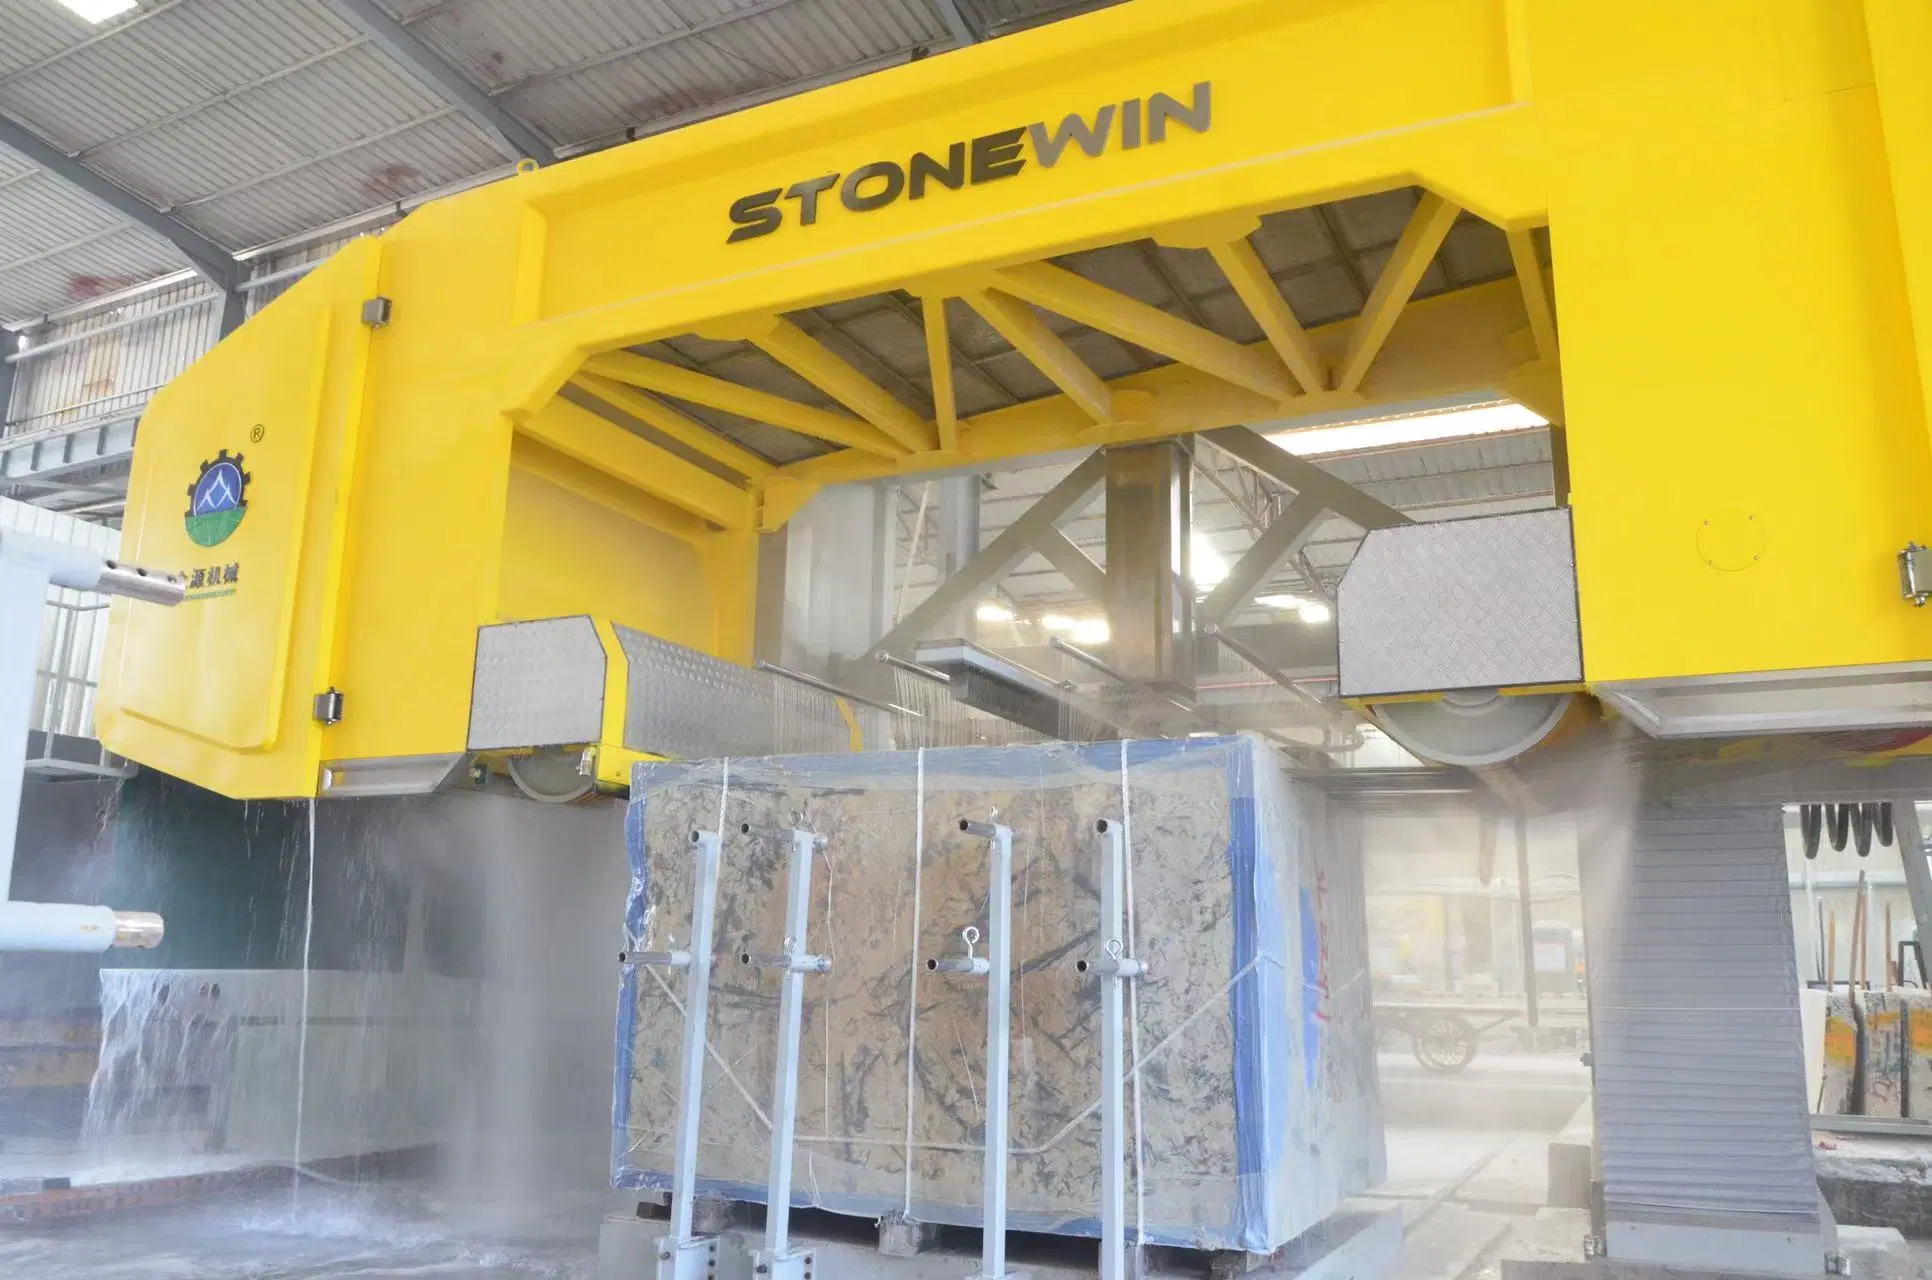 Define Excellence in Block Cutting with Zhongyuan Stonewin's 58-Wire Diamond Multi-Wire Saw Machine. Achieve Exceptional Cuts, Shaping Projects with Meticulous